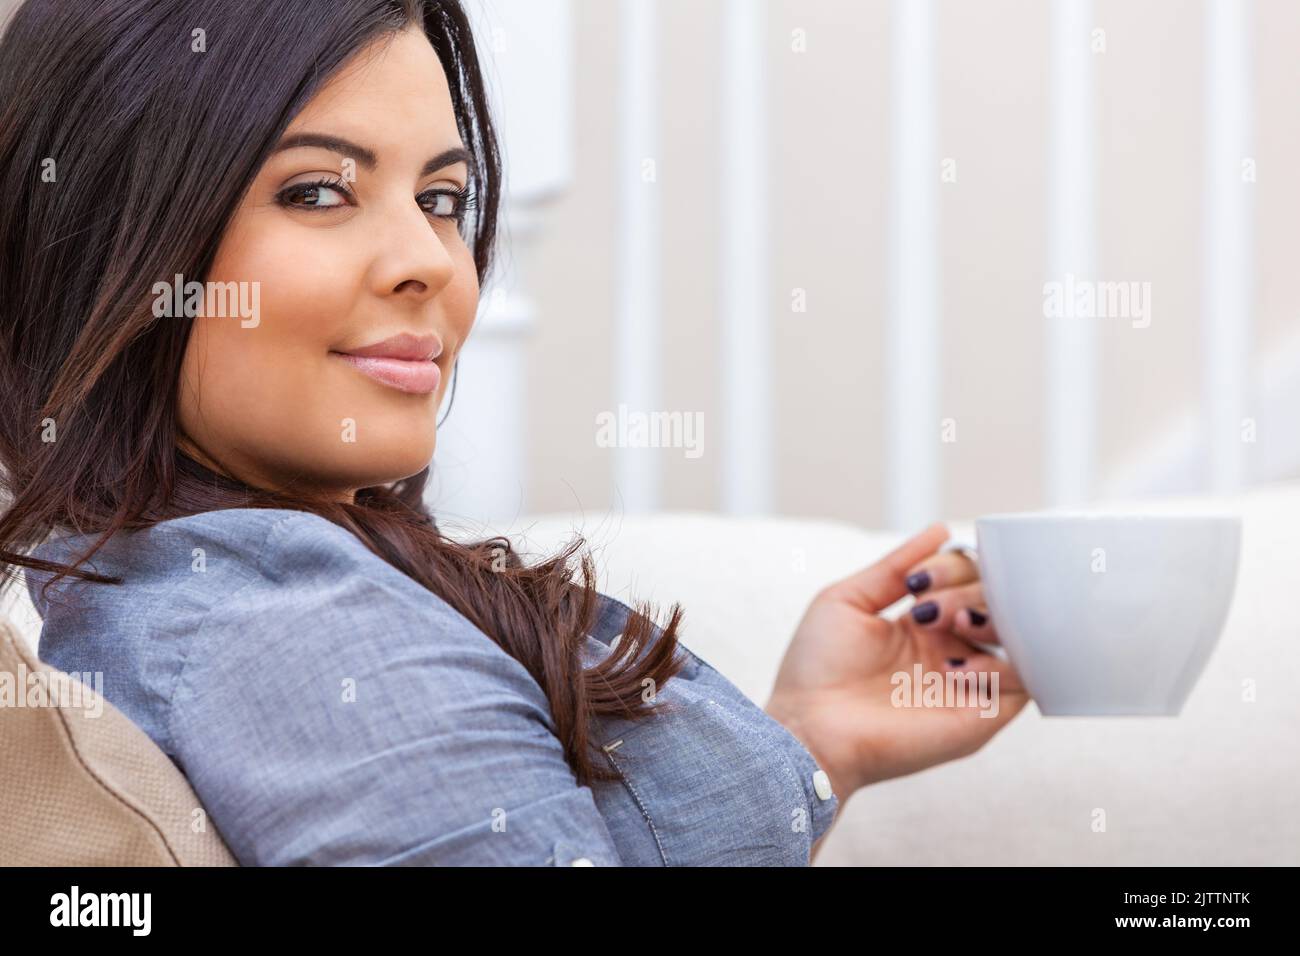 Portrait of a beautiful young Latina Hispanic woman at home relaxing with a cup of tea or coffee. Stock Photo